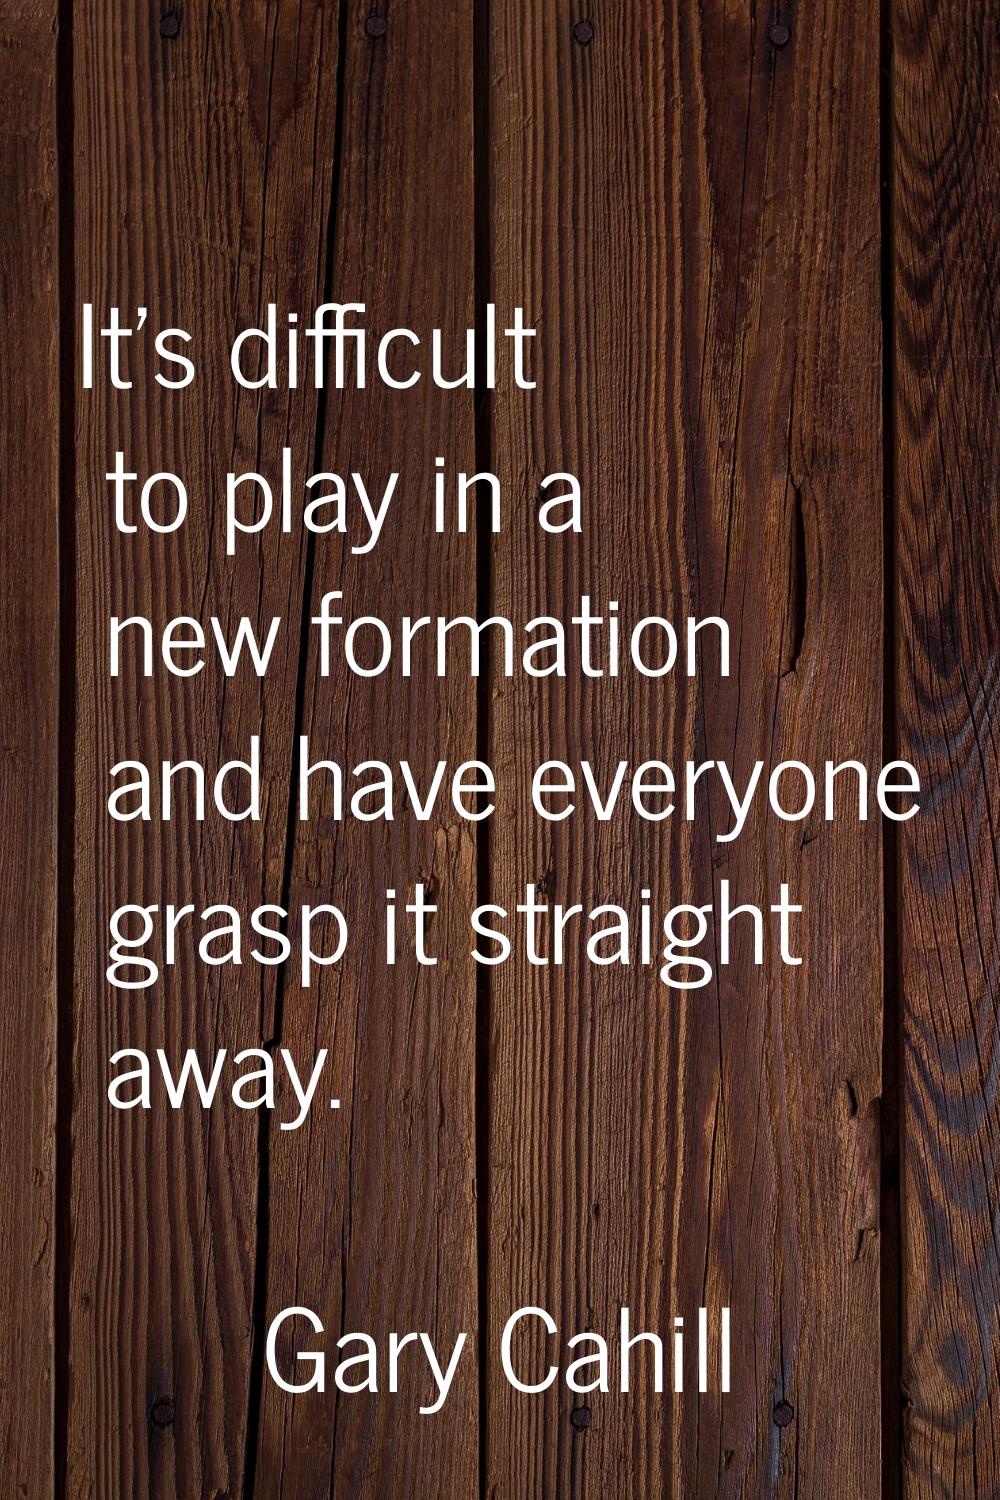 It's difficult to play in a new formation and have everyone grasp it straight away.